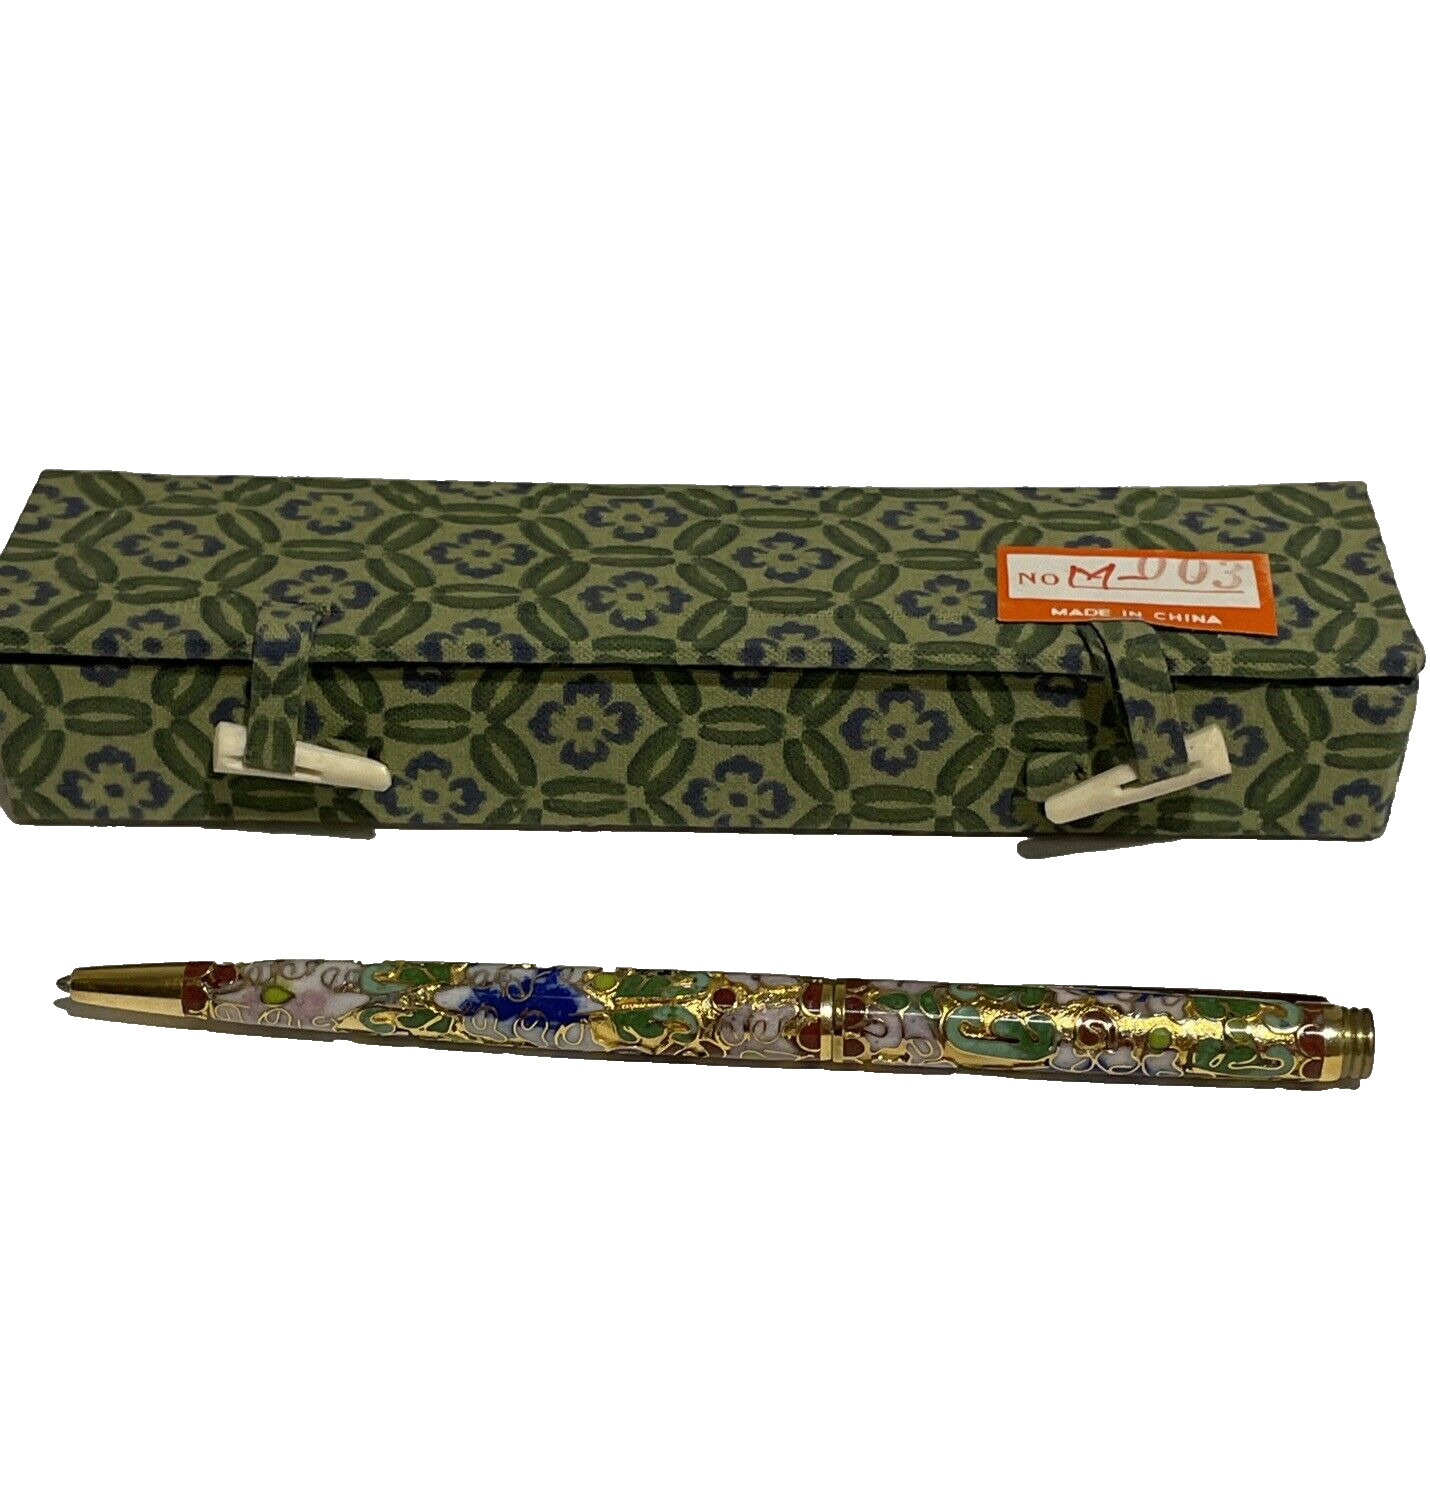 Vintage Cloisonne Enameled Ball Point Pen In Box Chinese Floral Art NEW READ